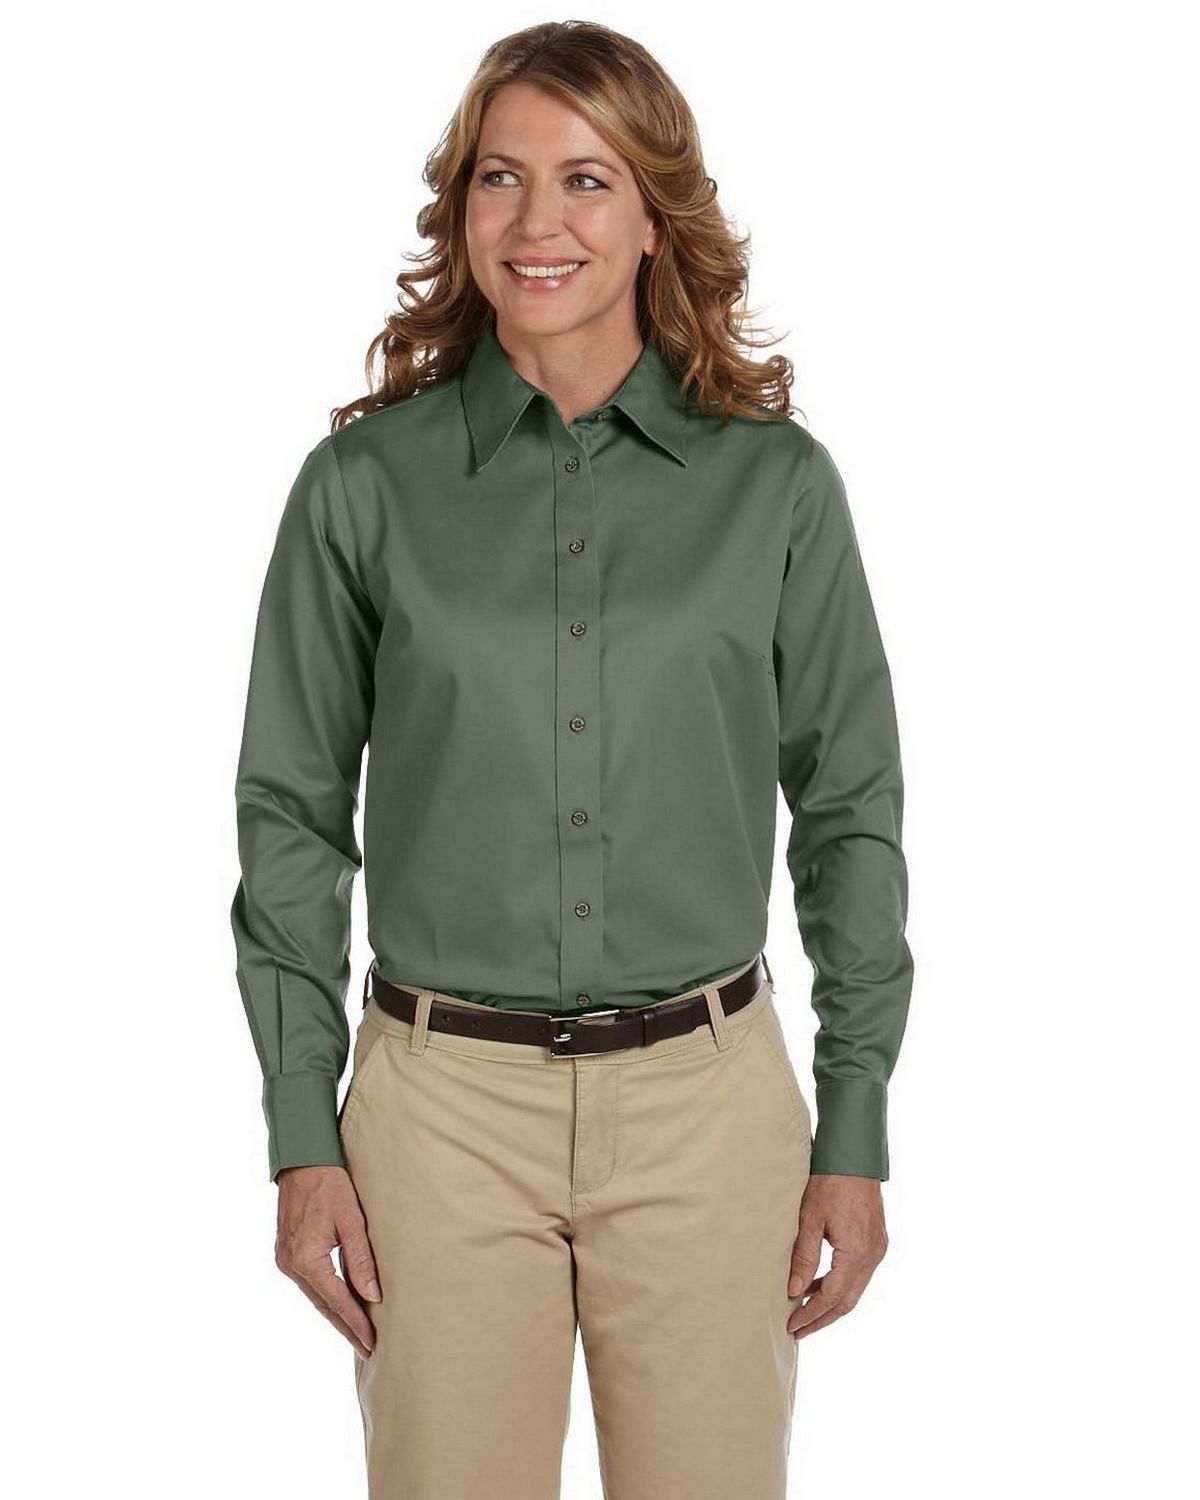 Harriton M500W Ladies Twill Shirt with Stain Release - ApparelnBags.com